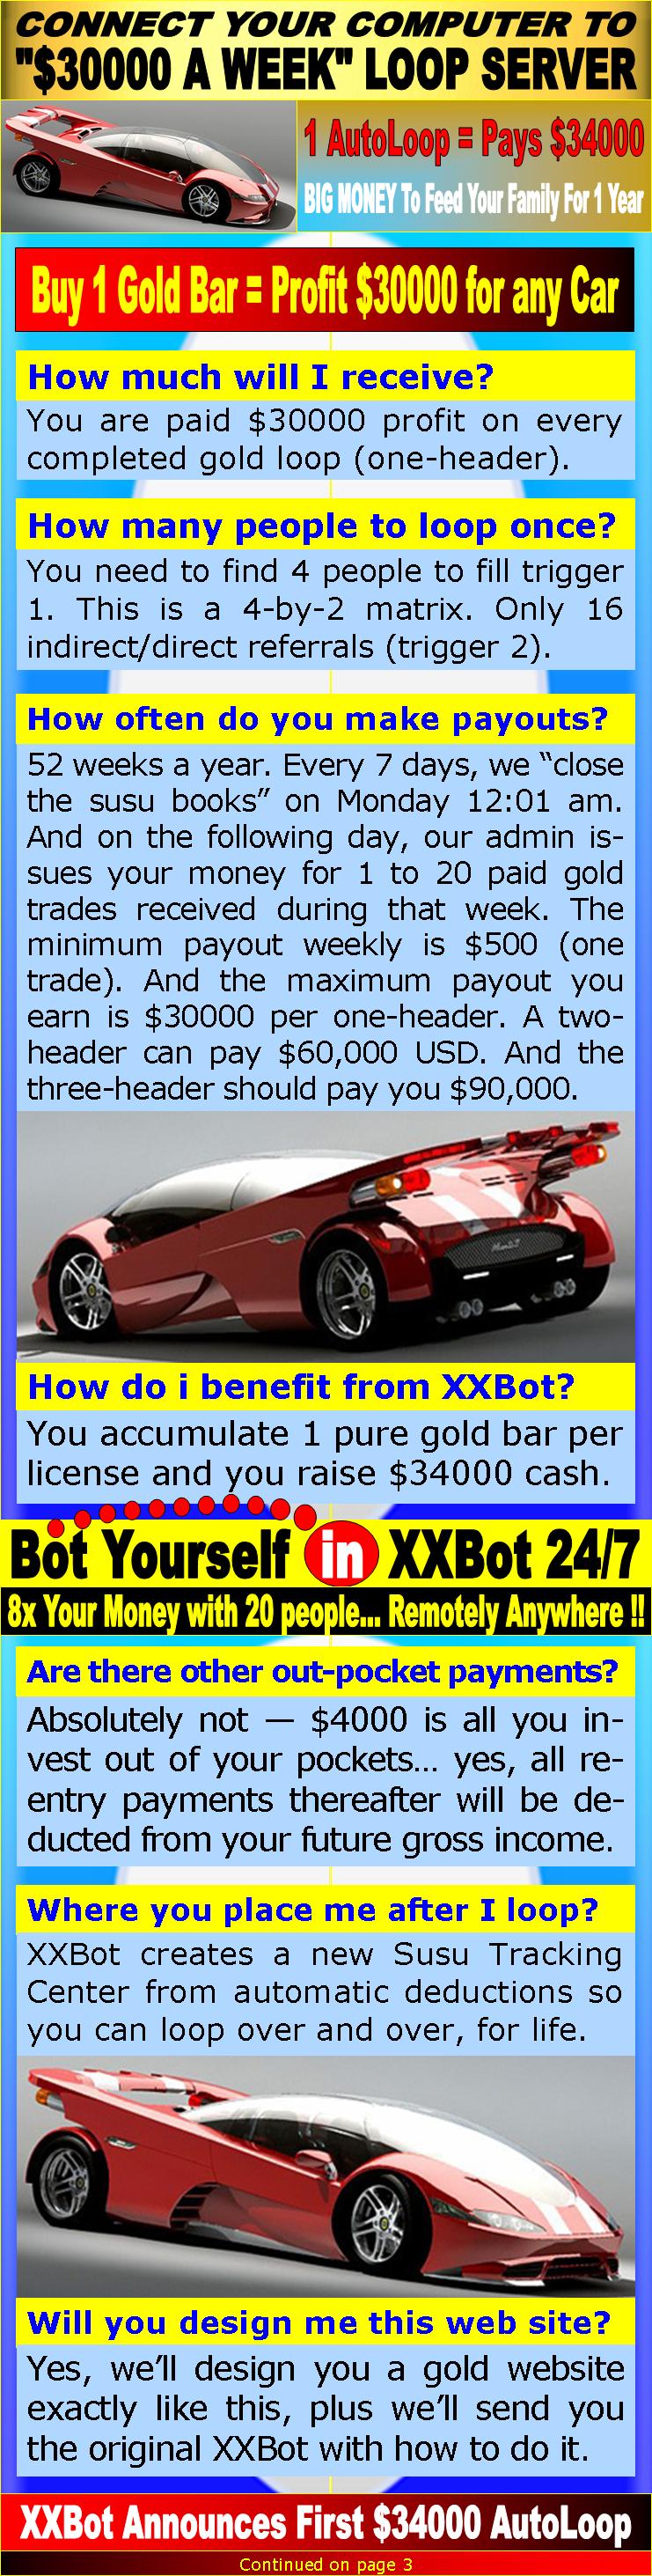 bot-yourself-in-30000dollars-a-week-autoloops-for-